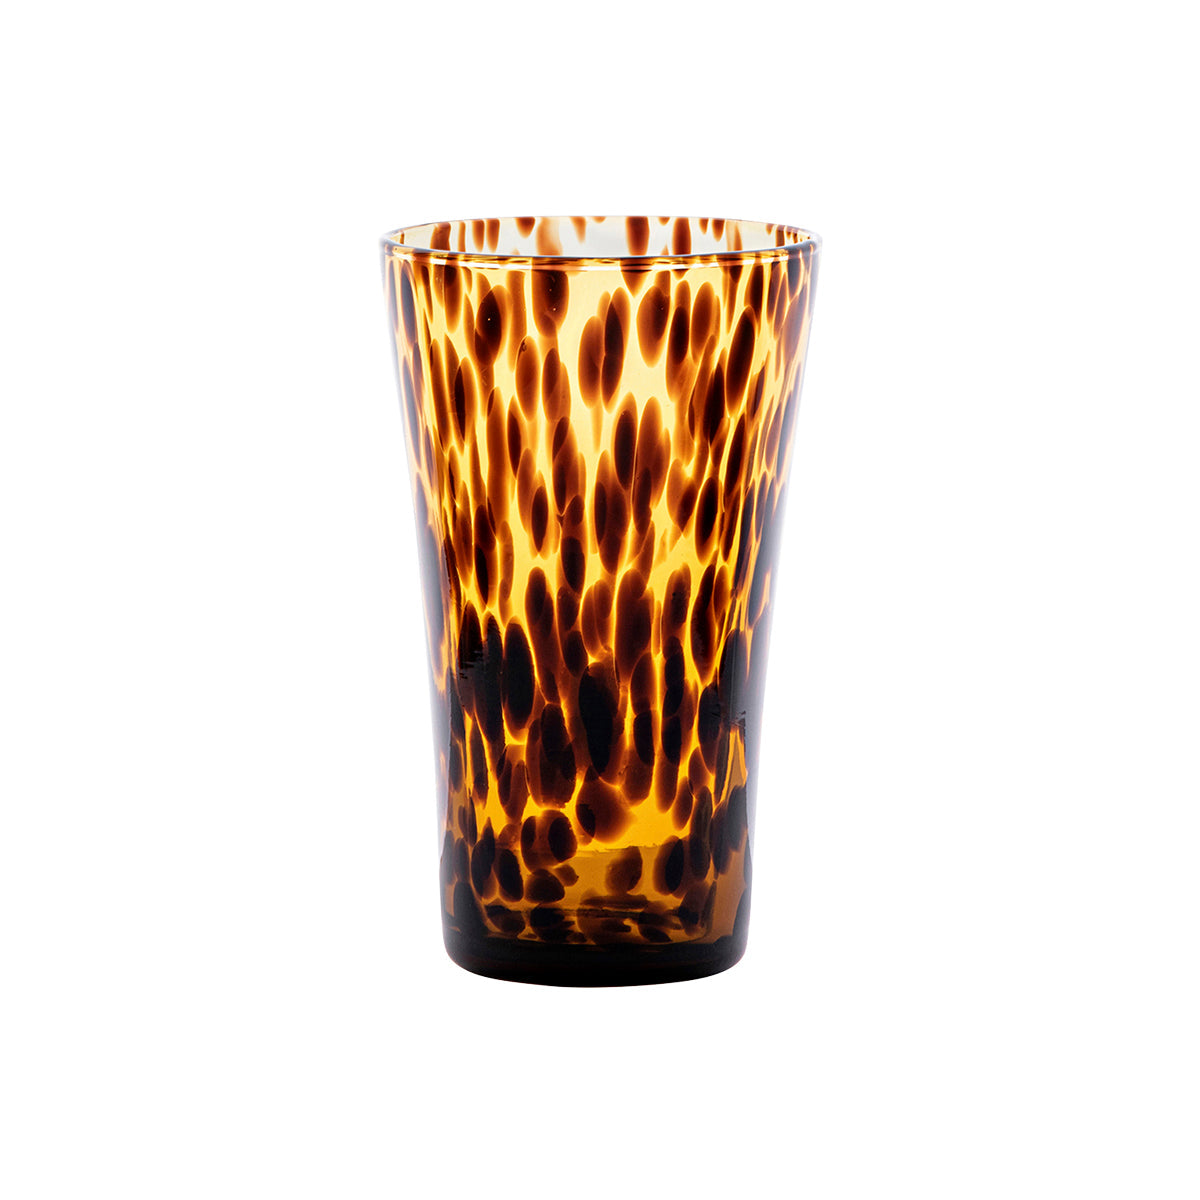 This richly hued tortoiseshell stemless wine glass, with translucent brown body and dark specks, with handsomely hold a variety of beverages from hand-crafted cocktails to craft beers.